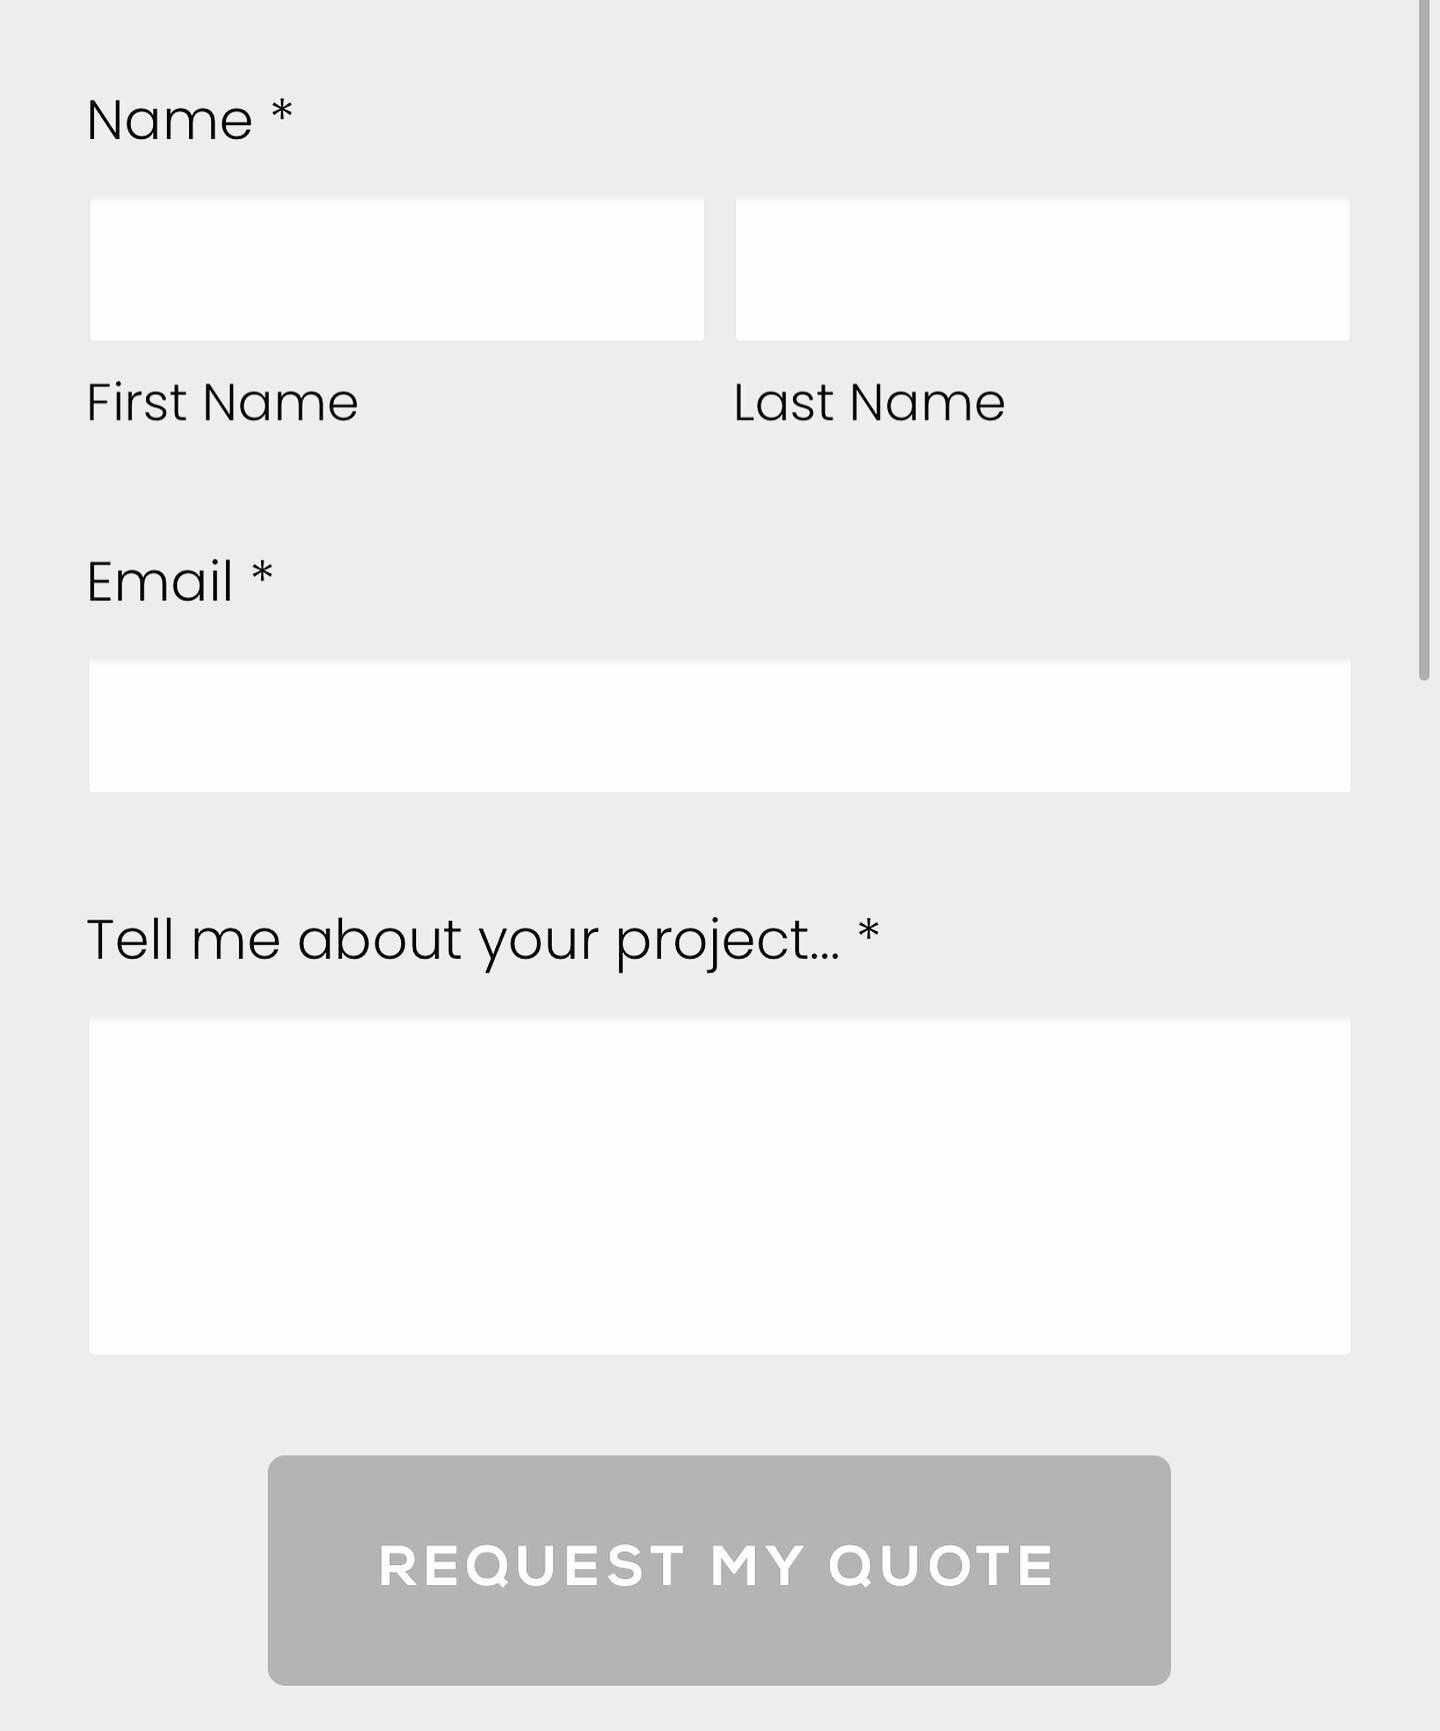 Did you know you can request a quote directly on the new website? OR if you have any questions you can ask those there too! Hit that submit button and let&rsquo;s talk about your next project!